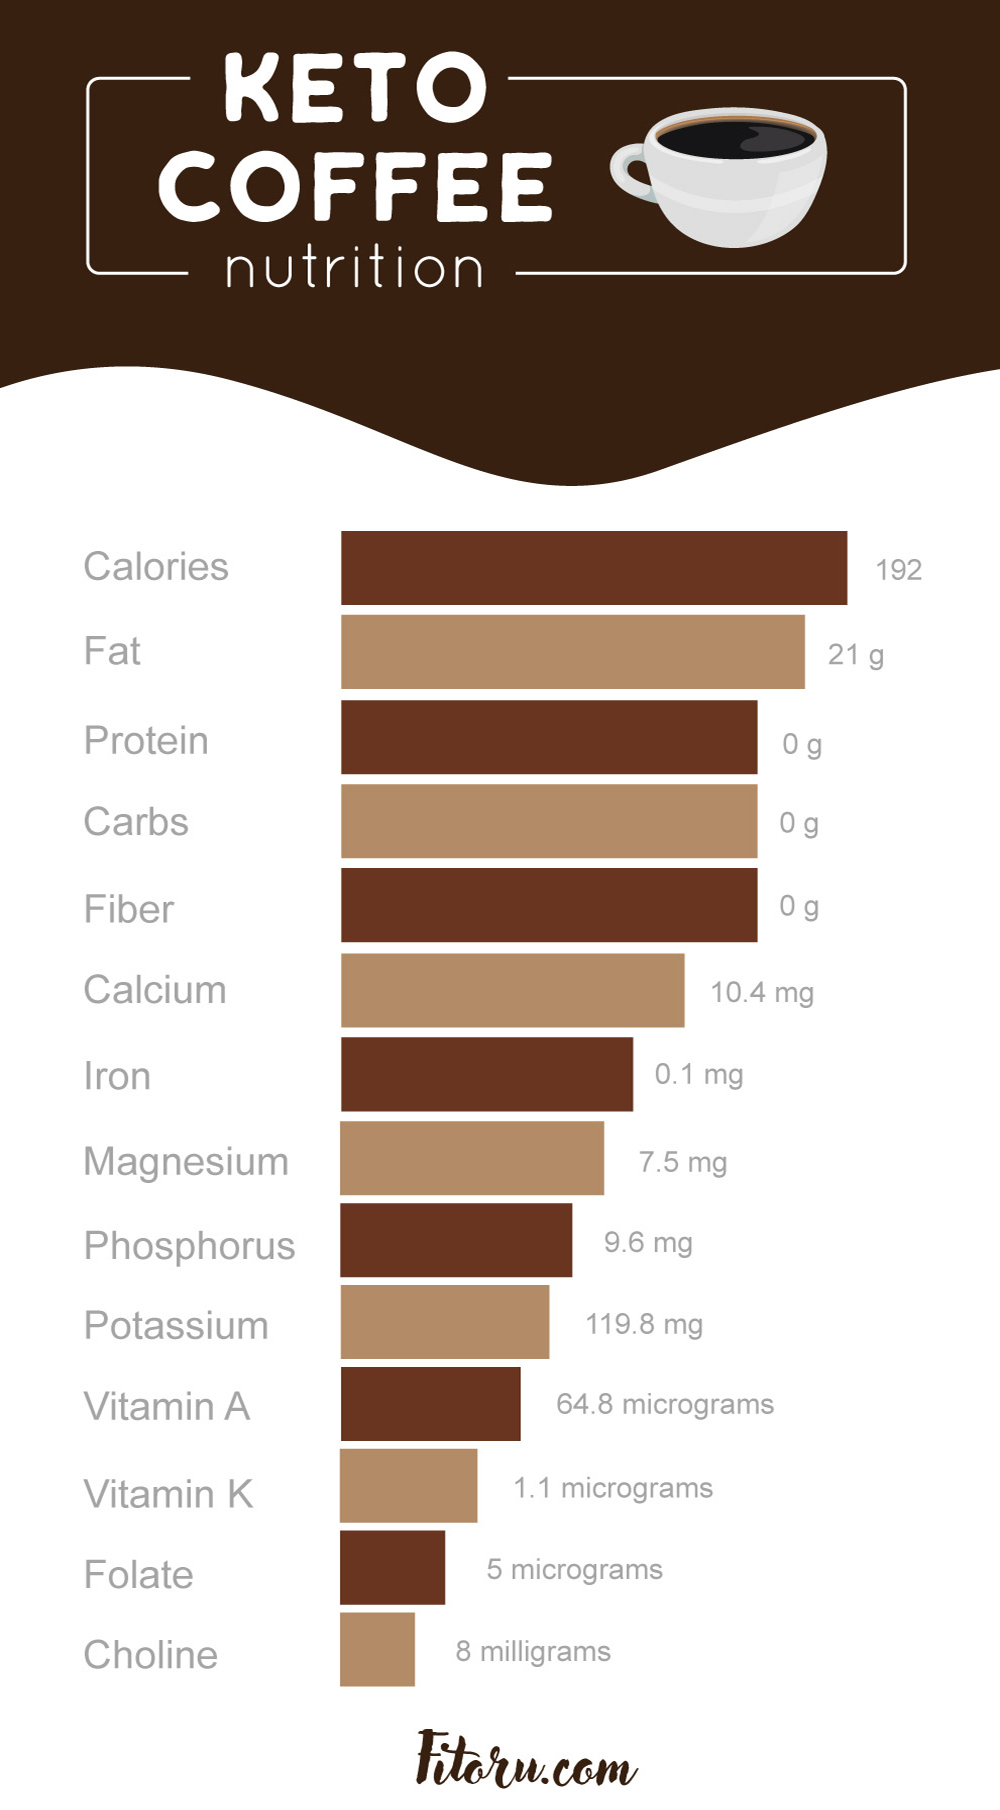 Here are the nutritional facts on keto coffee.